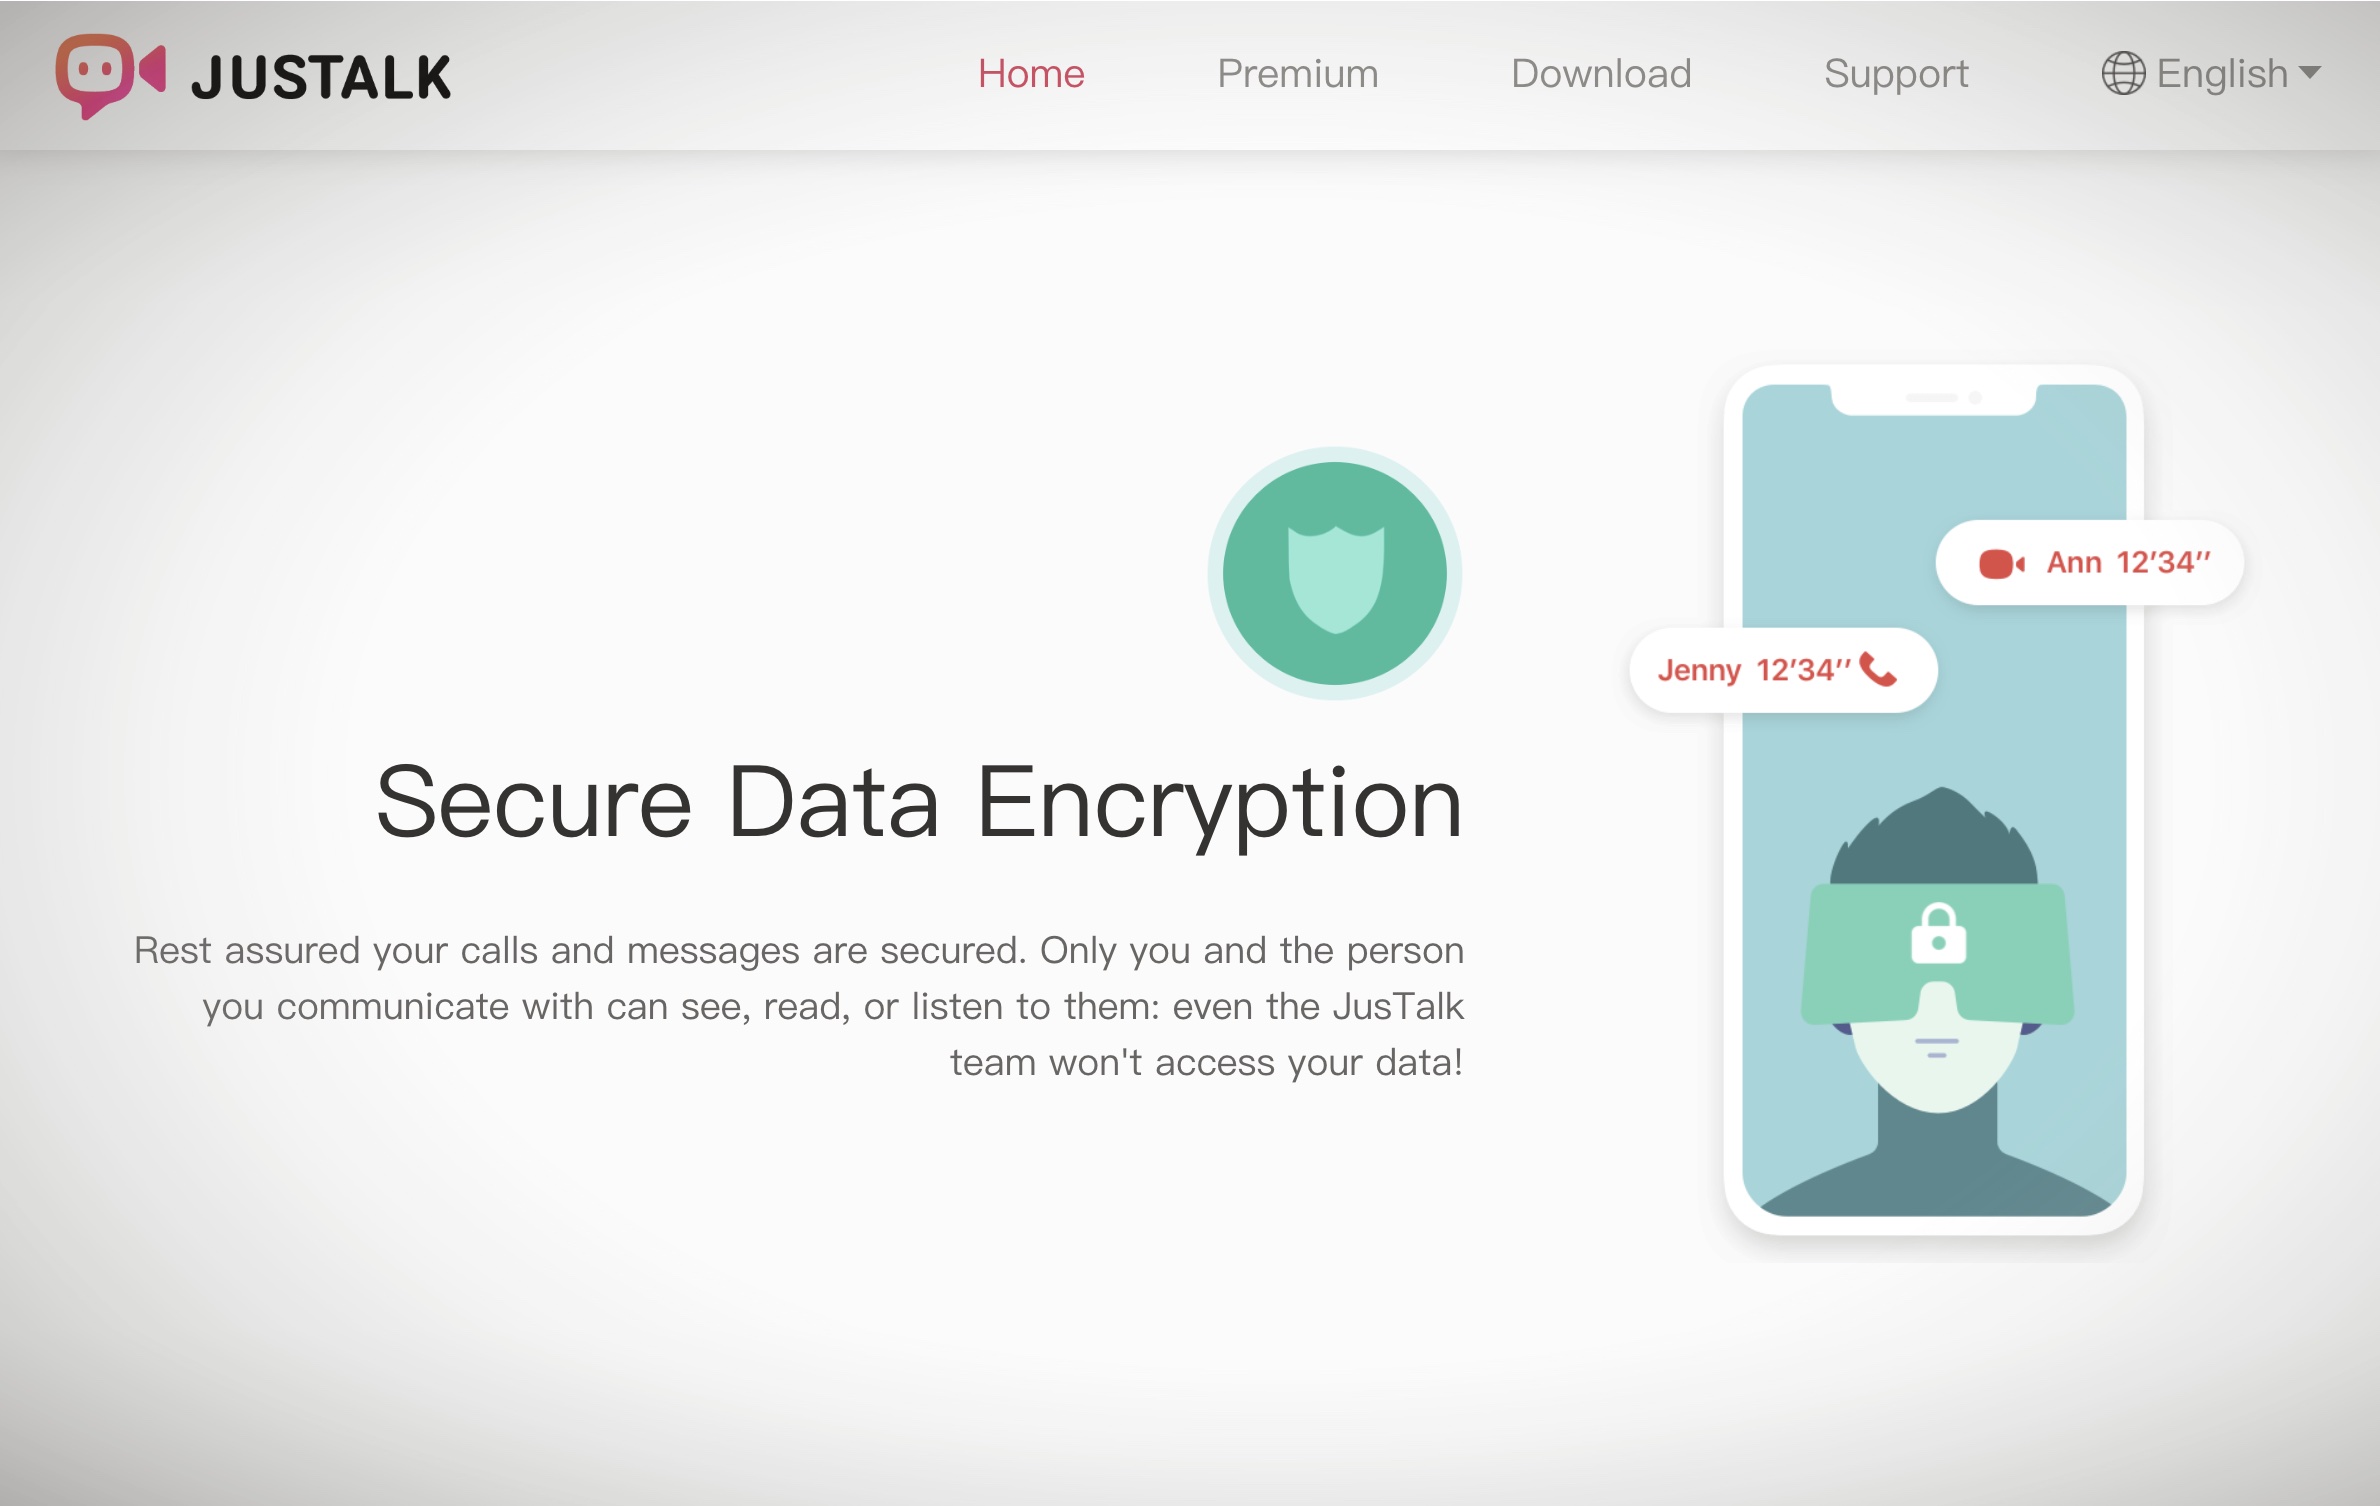 JusTalk's website that claims it uses end-to-end encryption, but a cache of spilled user data proves otherwise.